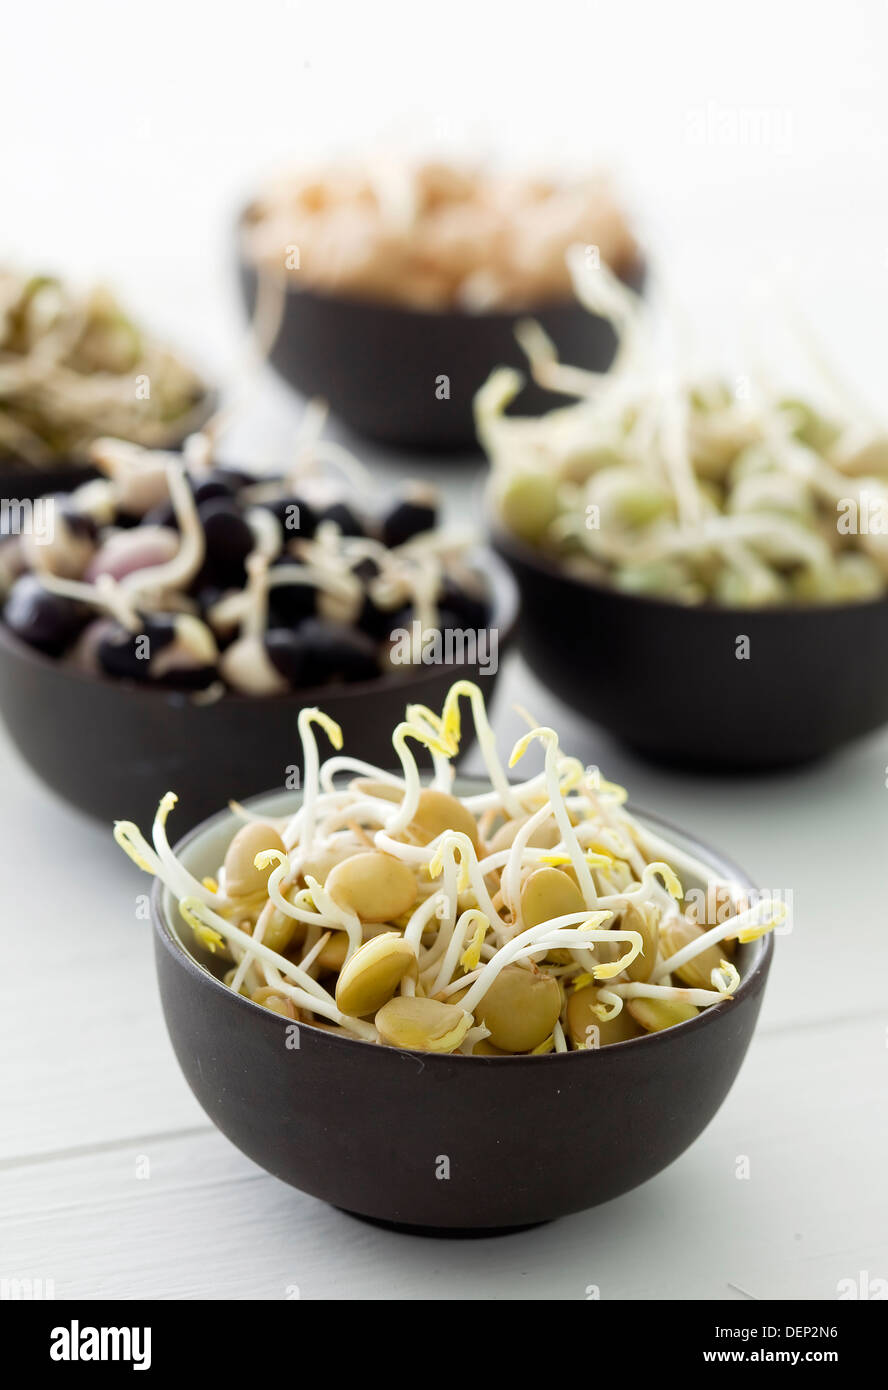 Small black bowls filled with various sprouting legumes and pulses; sprouts, peas, beans and lentils. Stock Photo